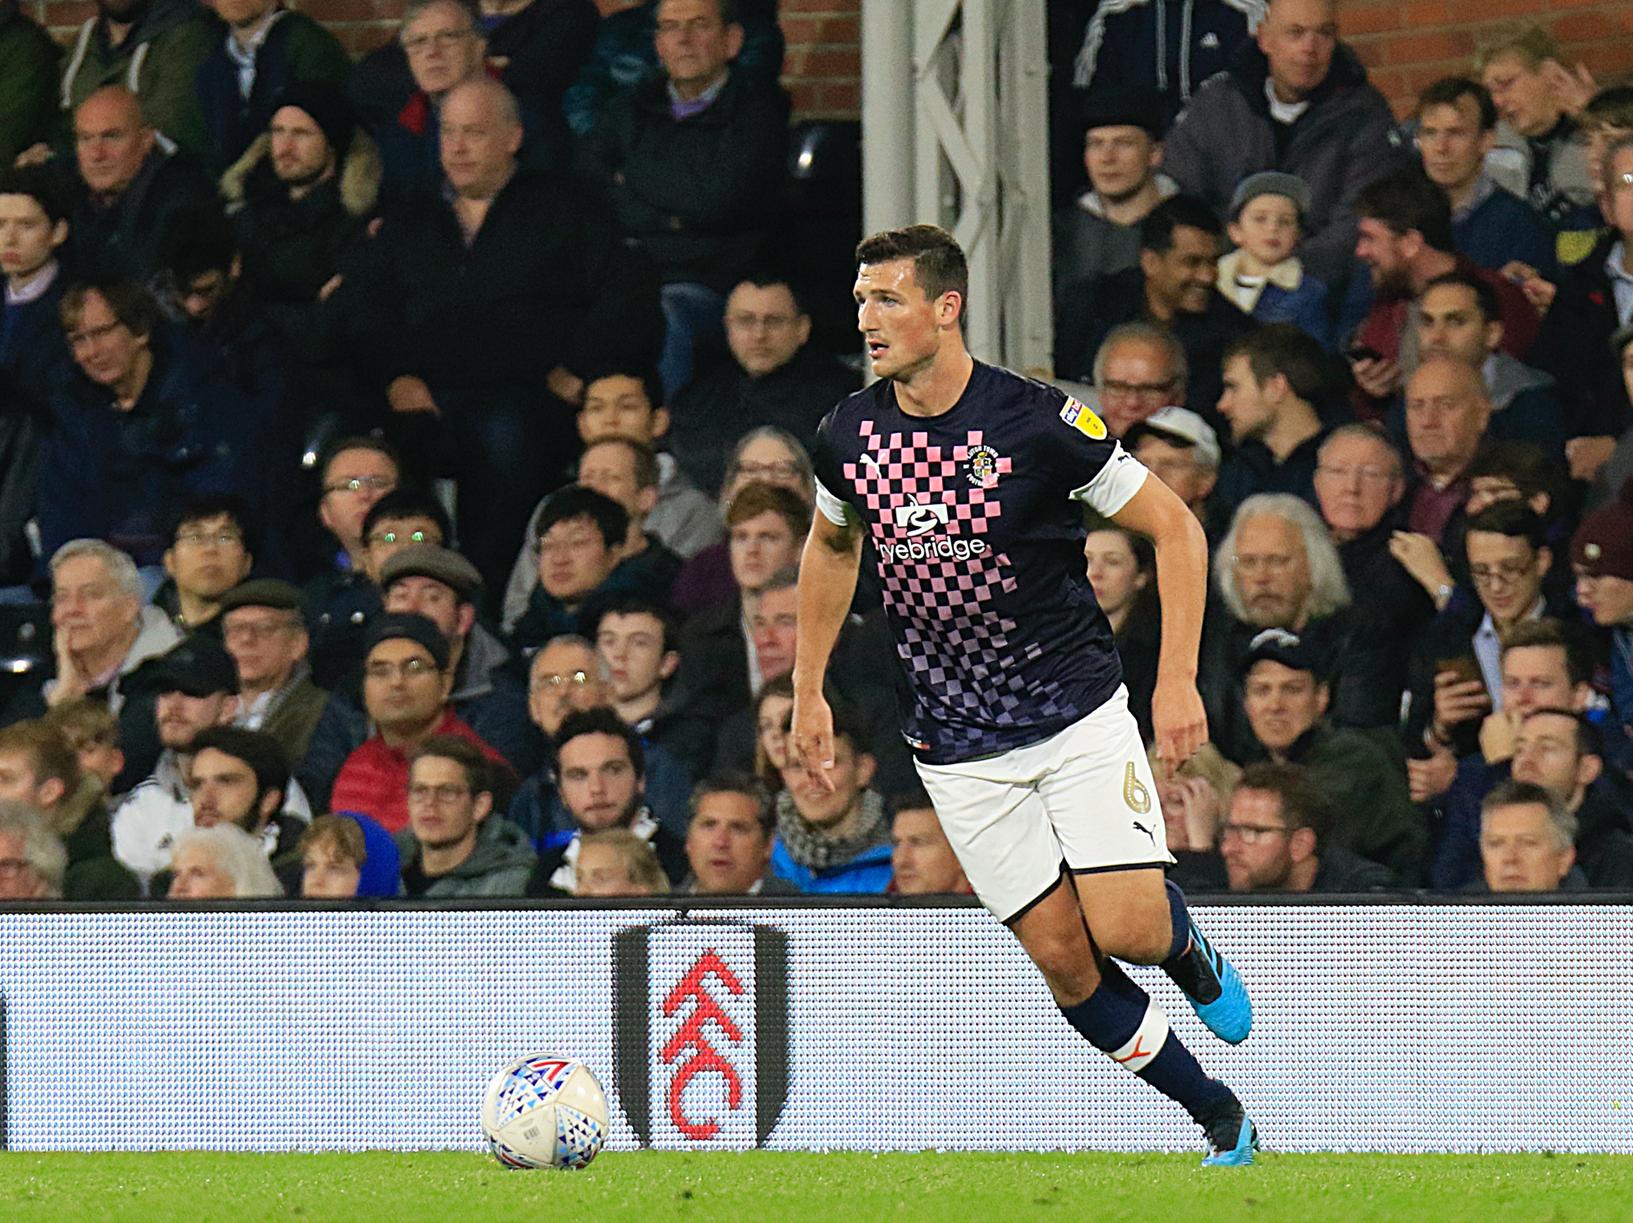 Not his best night in possession as an ill-judged pass across the defence led to Fulham moving in front just when it looked like Town had weathered the initial storm. Beaten by Mitrovic for the striker's third as well.